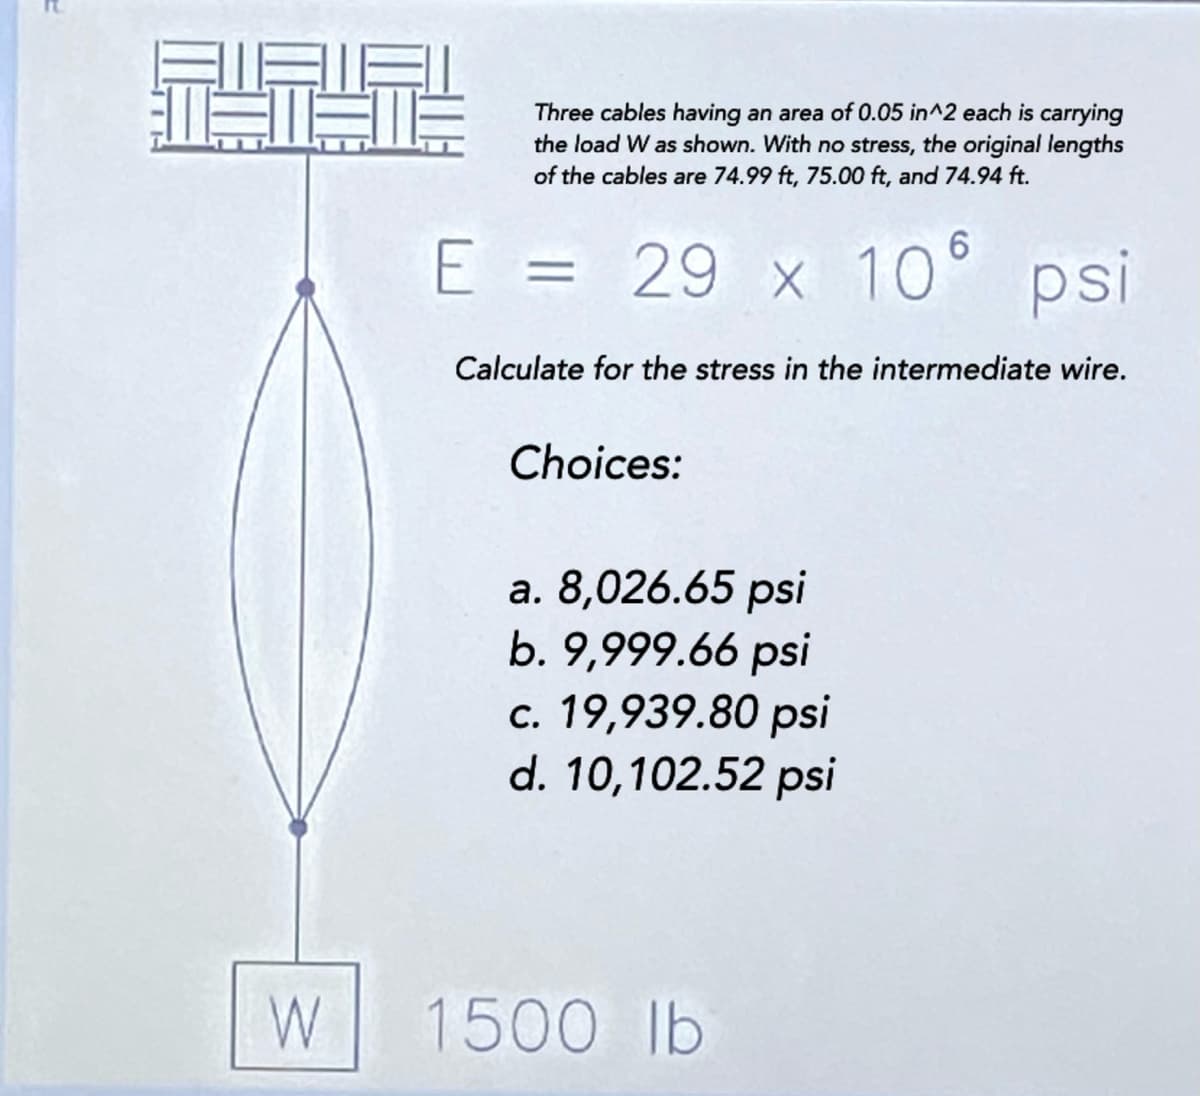 Three cables having an area of 0.05 in^2 each is carrying
the load W as shown. With no stress, the original lengths
of the cables are 74.99 ft, 75.00 ft, and 74.94 ft.
E =
29 x 10° psi
Calculate for the stress in the intermediate wire.
Choices:
a. 8,026.65 psi
b. 9,999.66 psi
c. 19,939.80 psi
d. 10,102.52 psi
1500 lb
